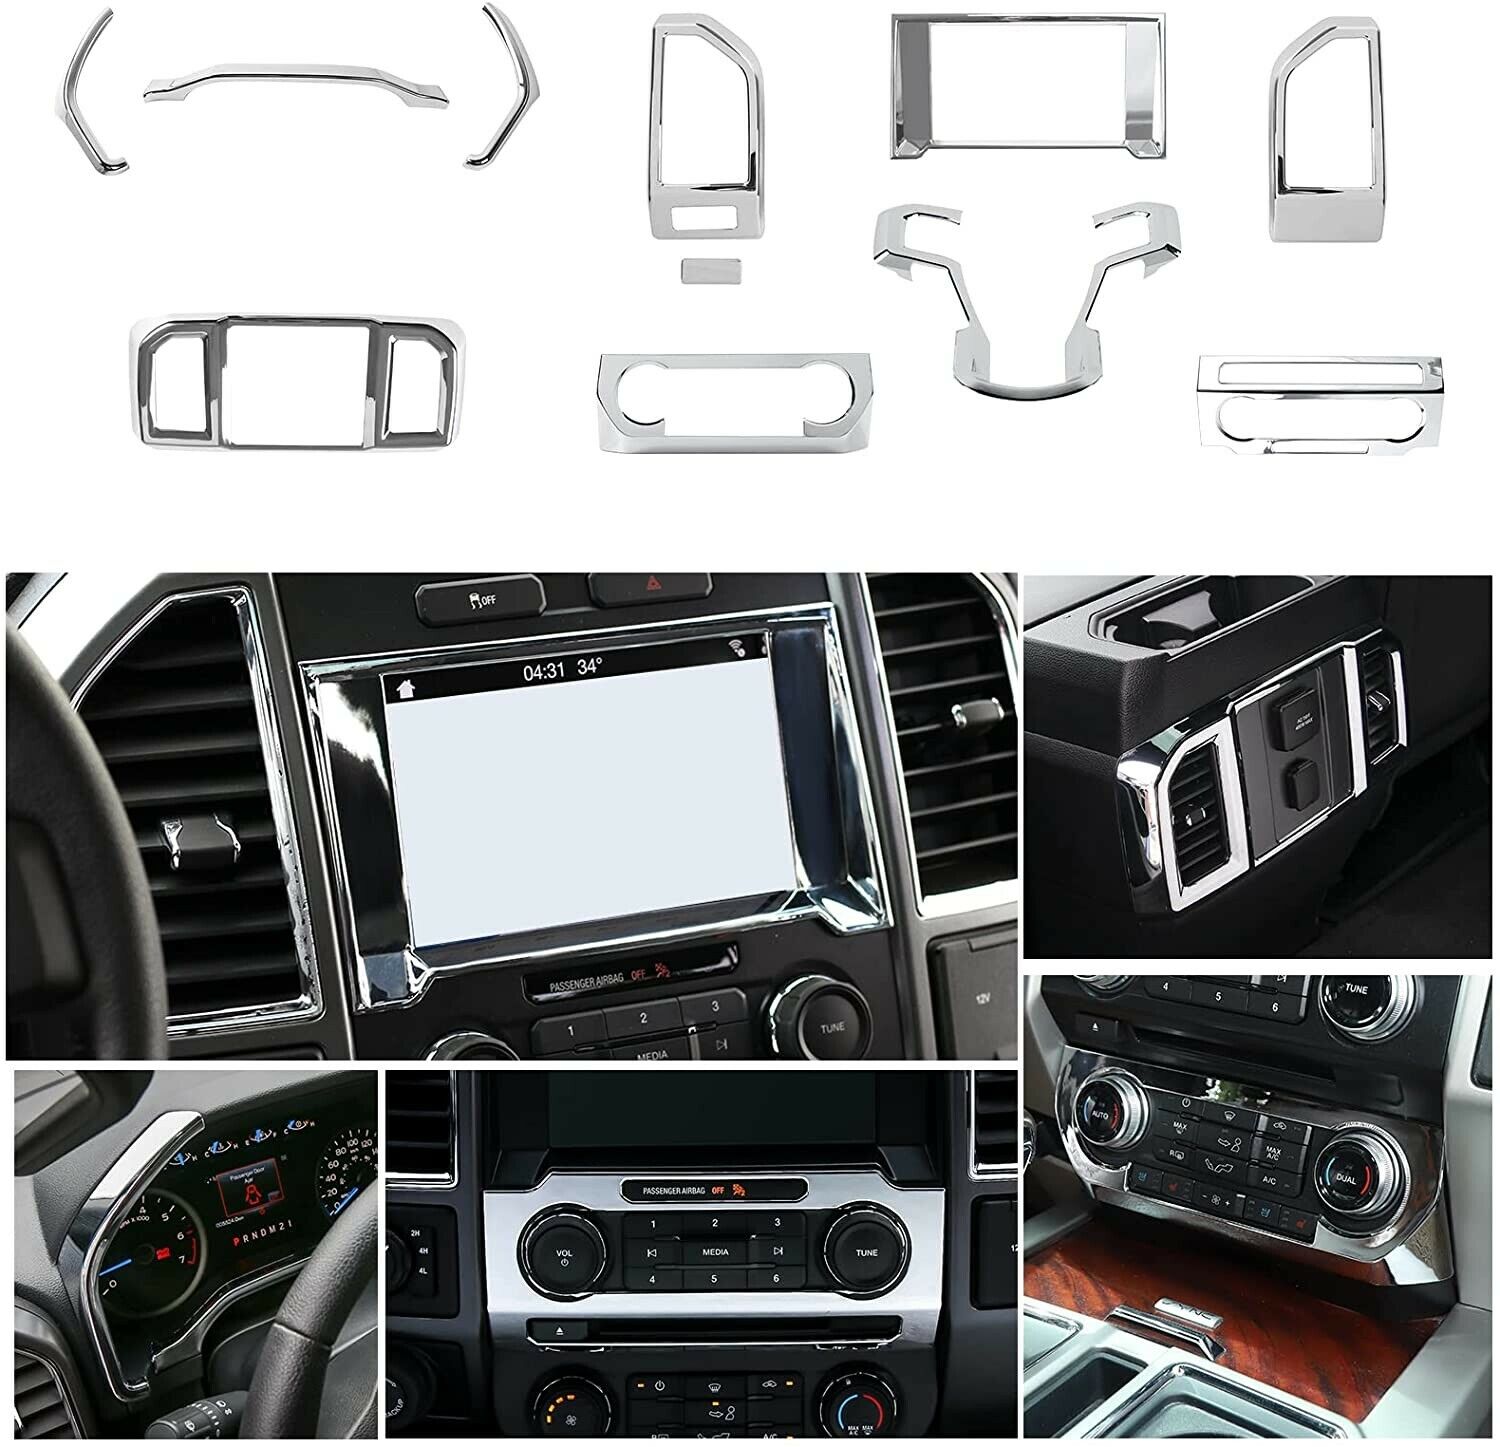 11 pc. Set Molded Chrome Dashboard Trim Cover Bezel For 17-21 Ford F250 F350